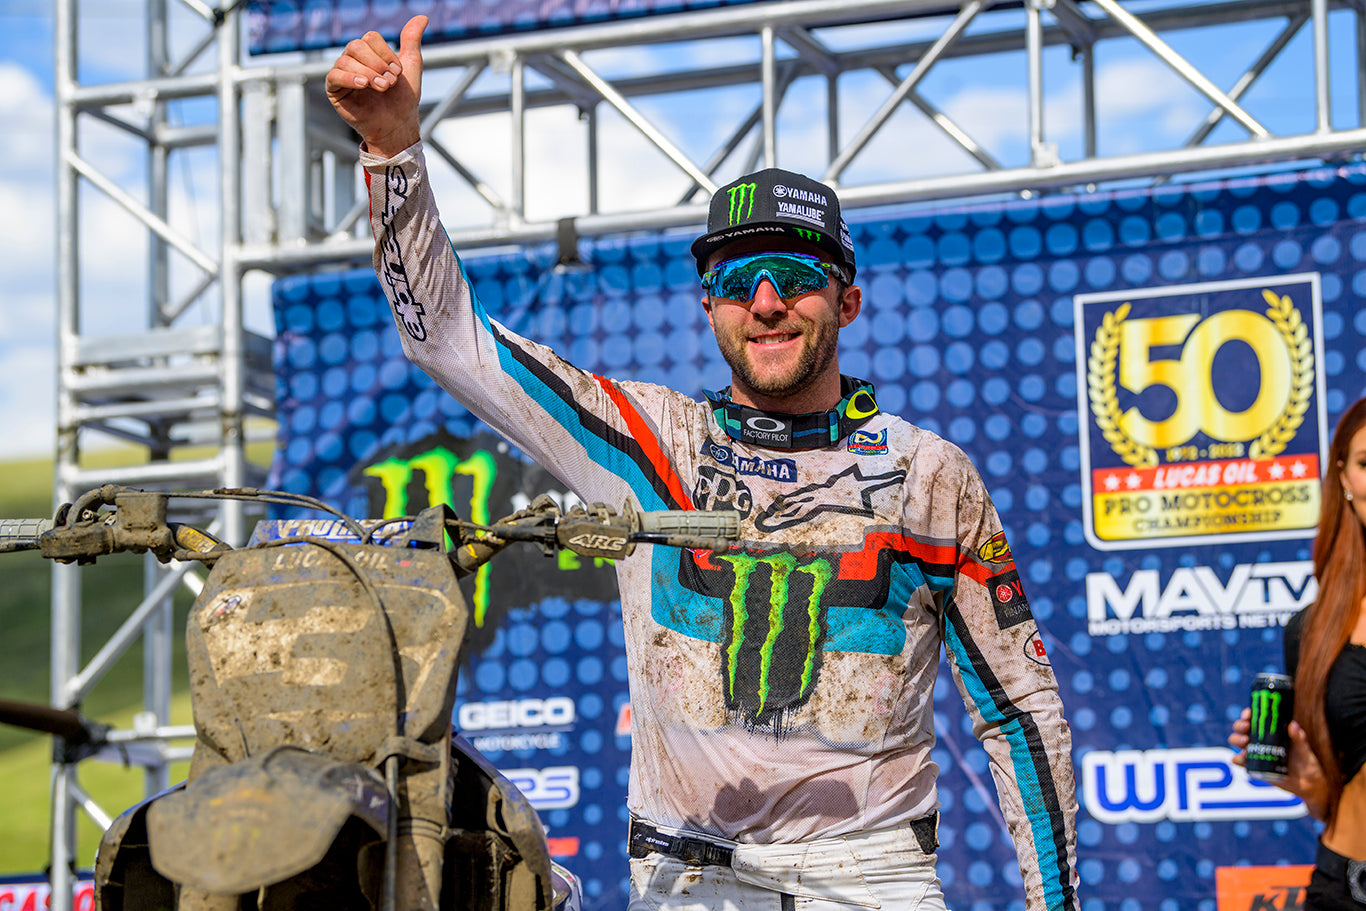 ELI TOMAC THRILLS HOME CROWD IN COLORADO WITH AMA 450 PRO MOTOCROSS RACE WIN AT THUNDER VALLEY